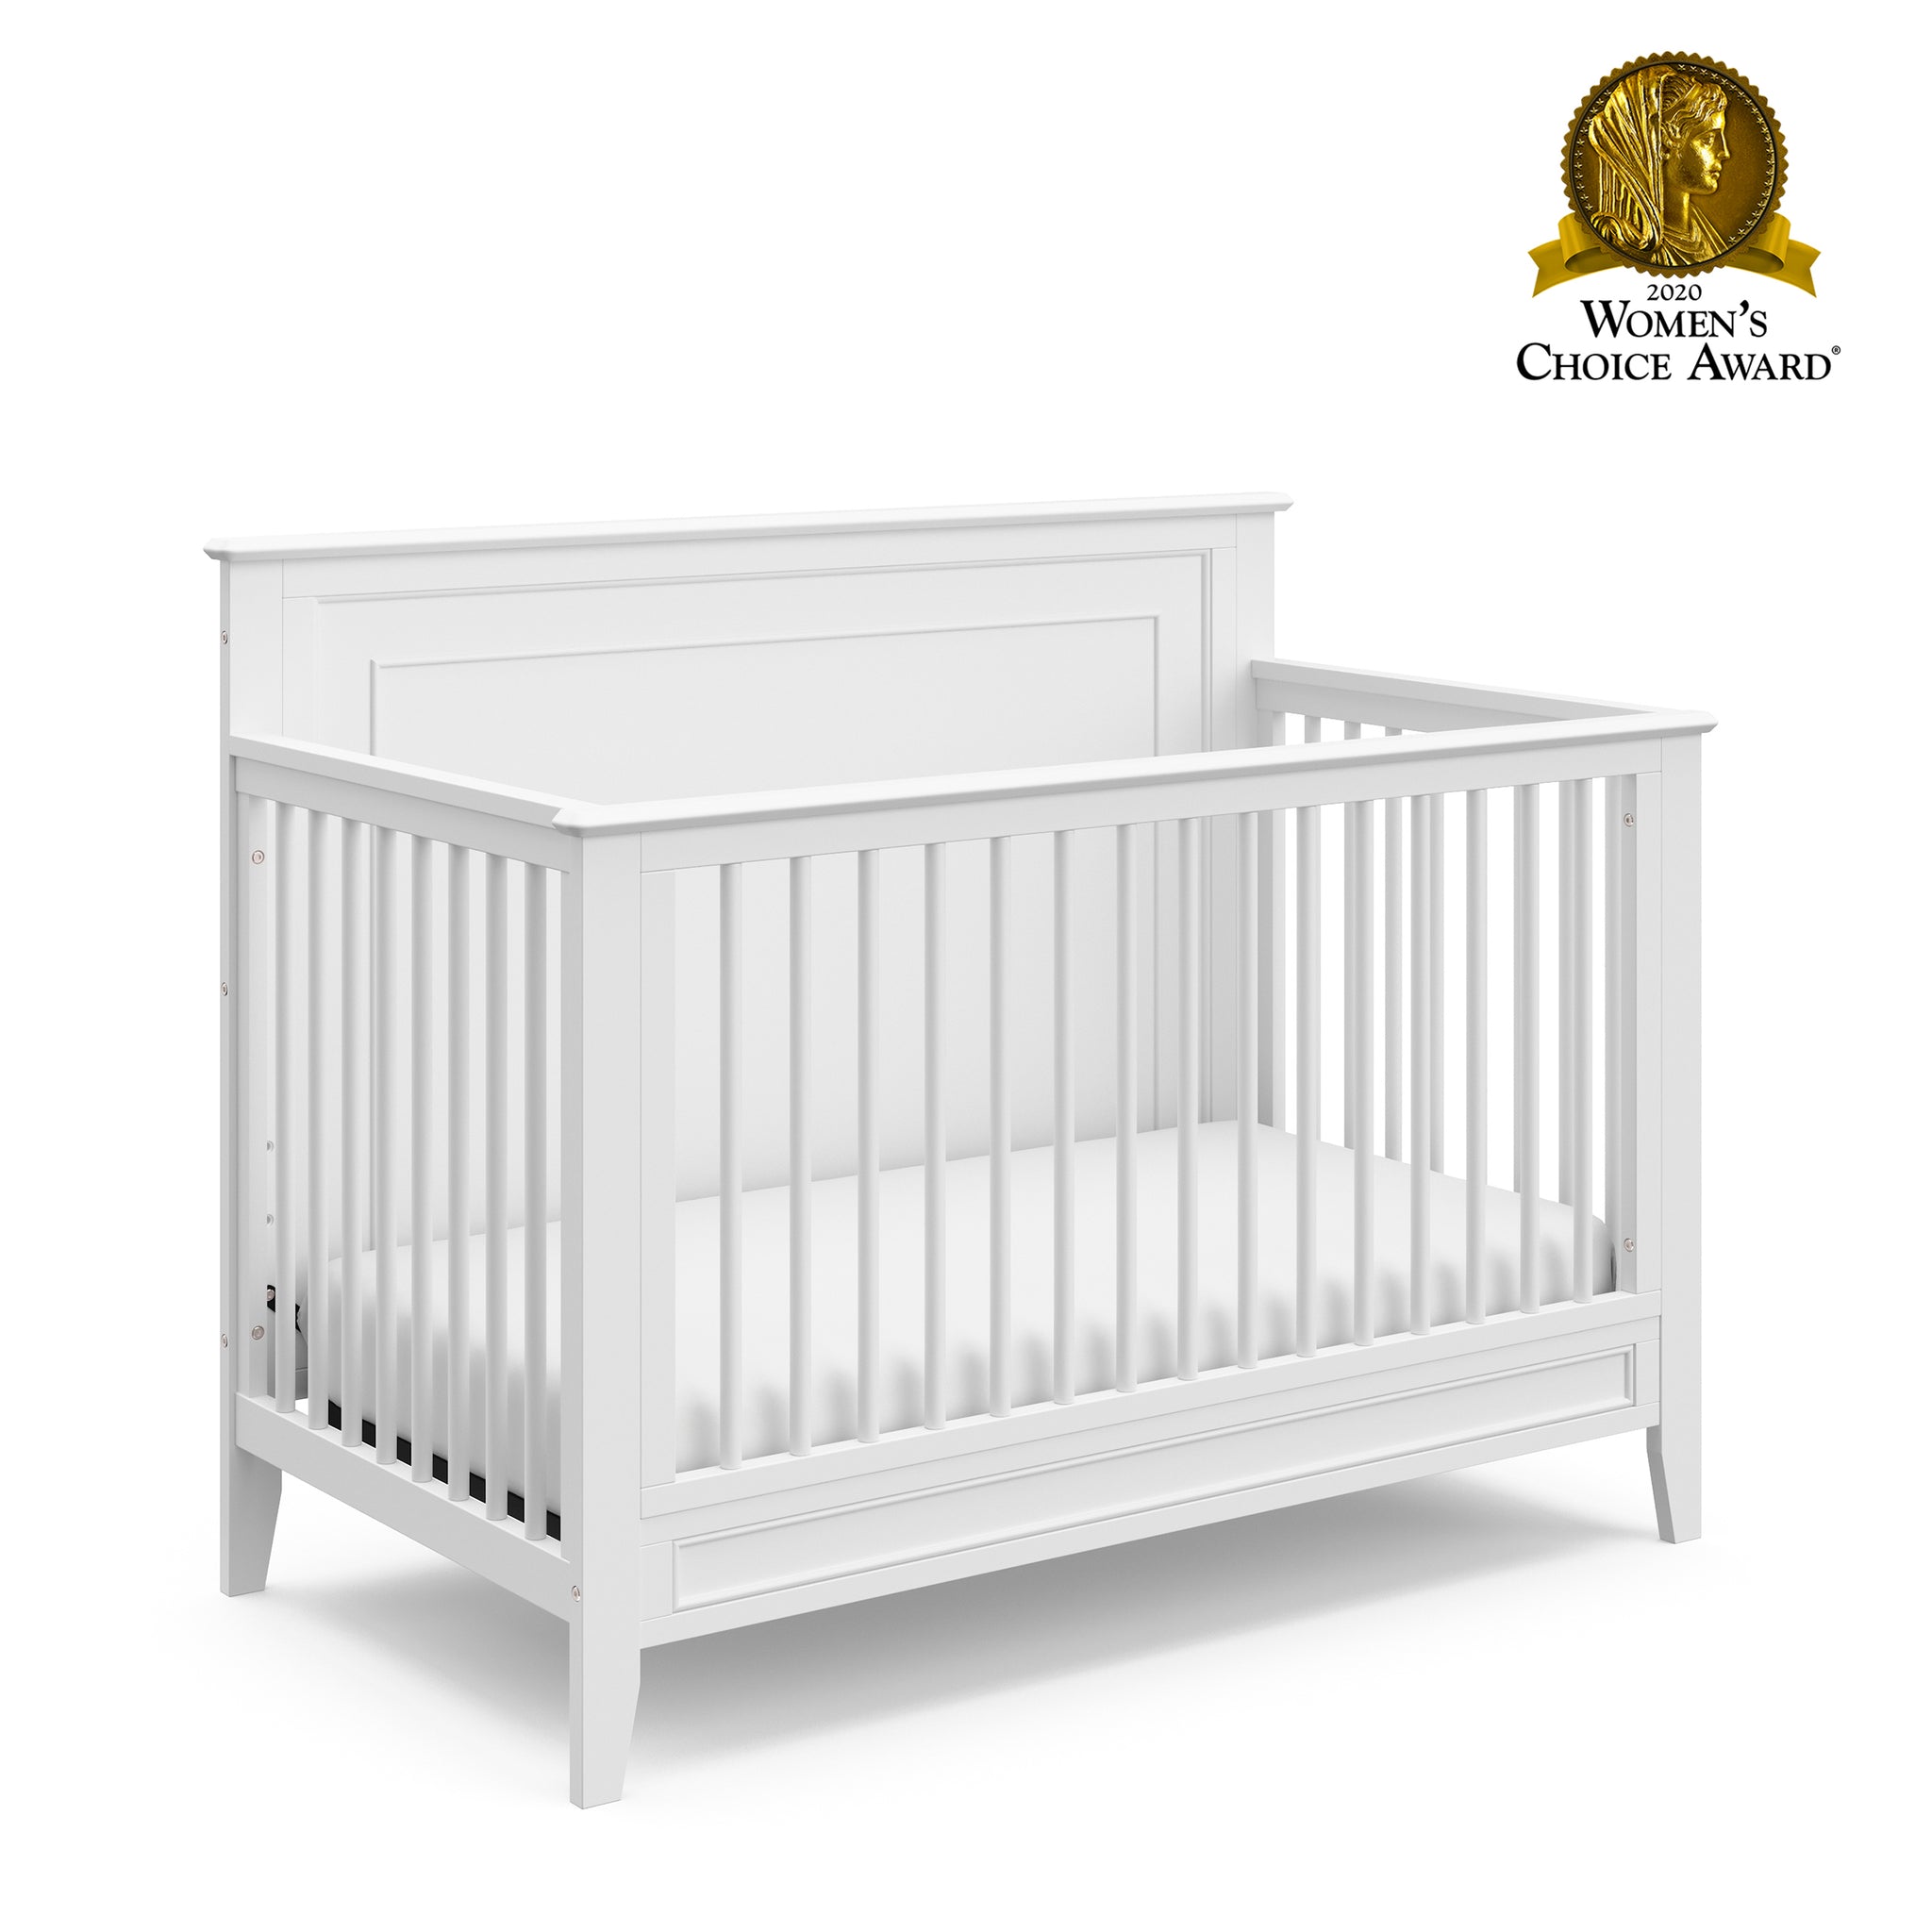 Front view of white crib graphic 